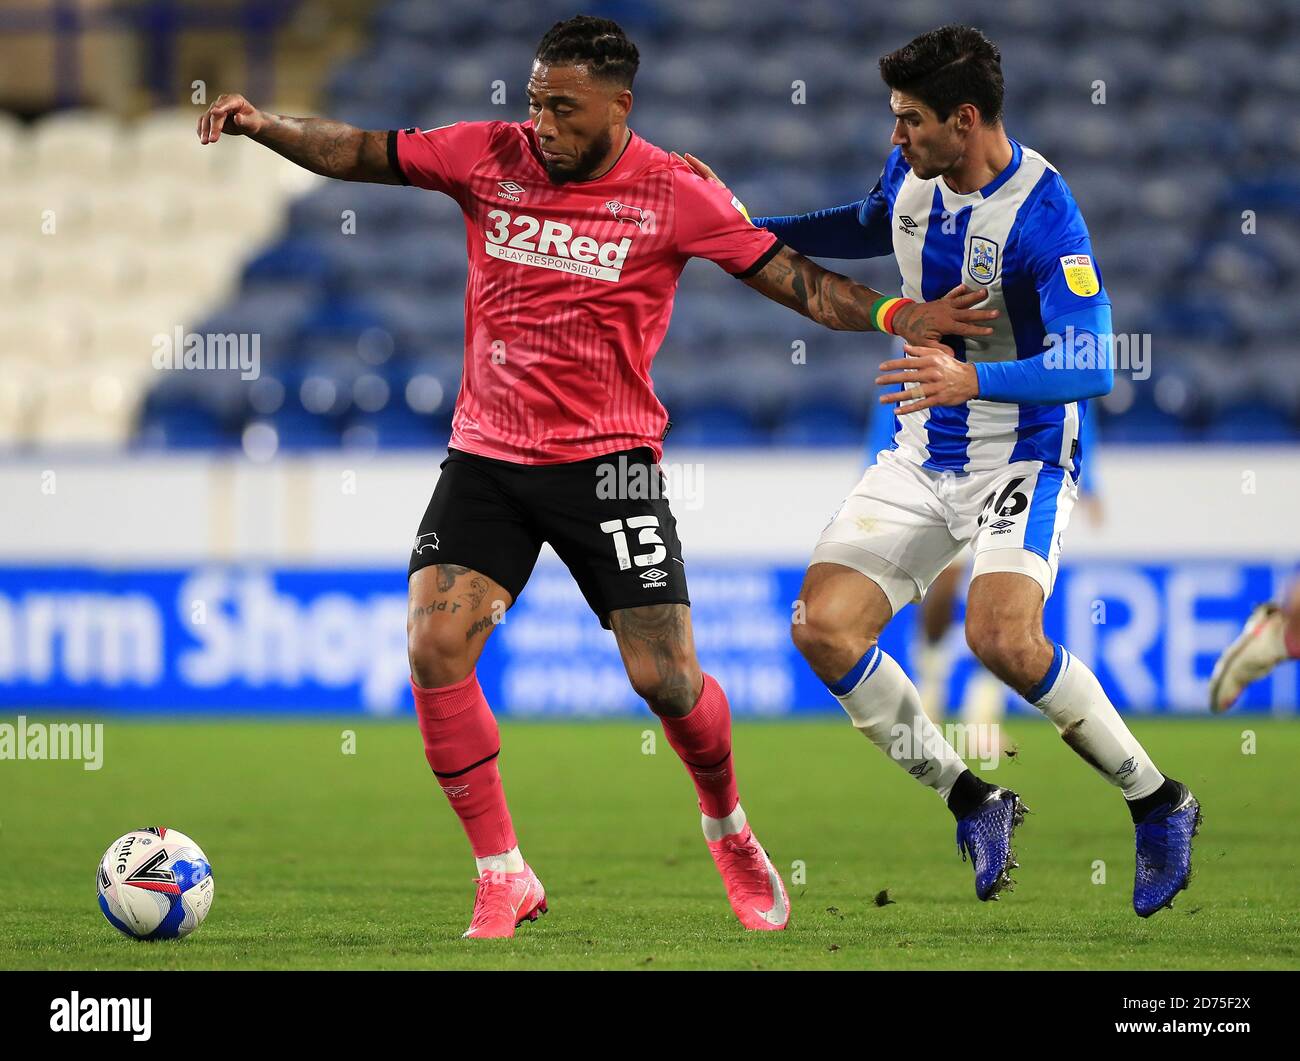 Derby County's Colin Kazim-Richards (left) and Huddersfield Town's Christopher Schindler battle for the ball during the Sky Bet Championship match at The John Smith's Stadium, Huddersfield. Stock Photo